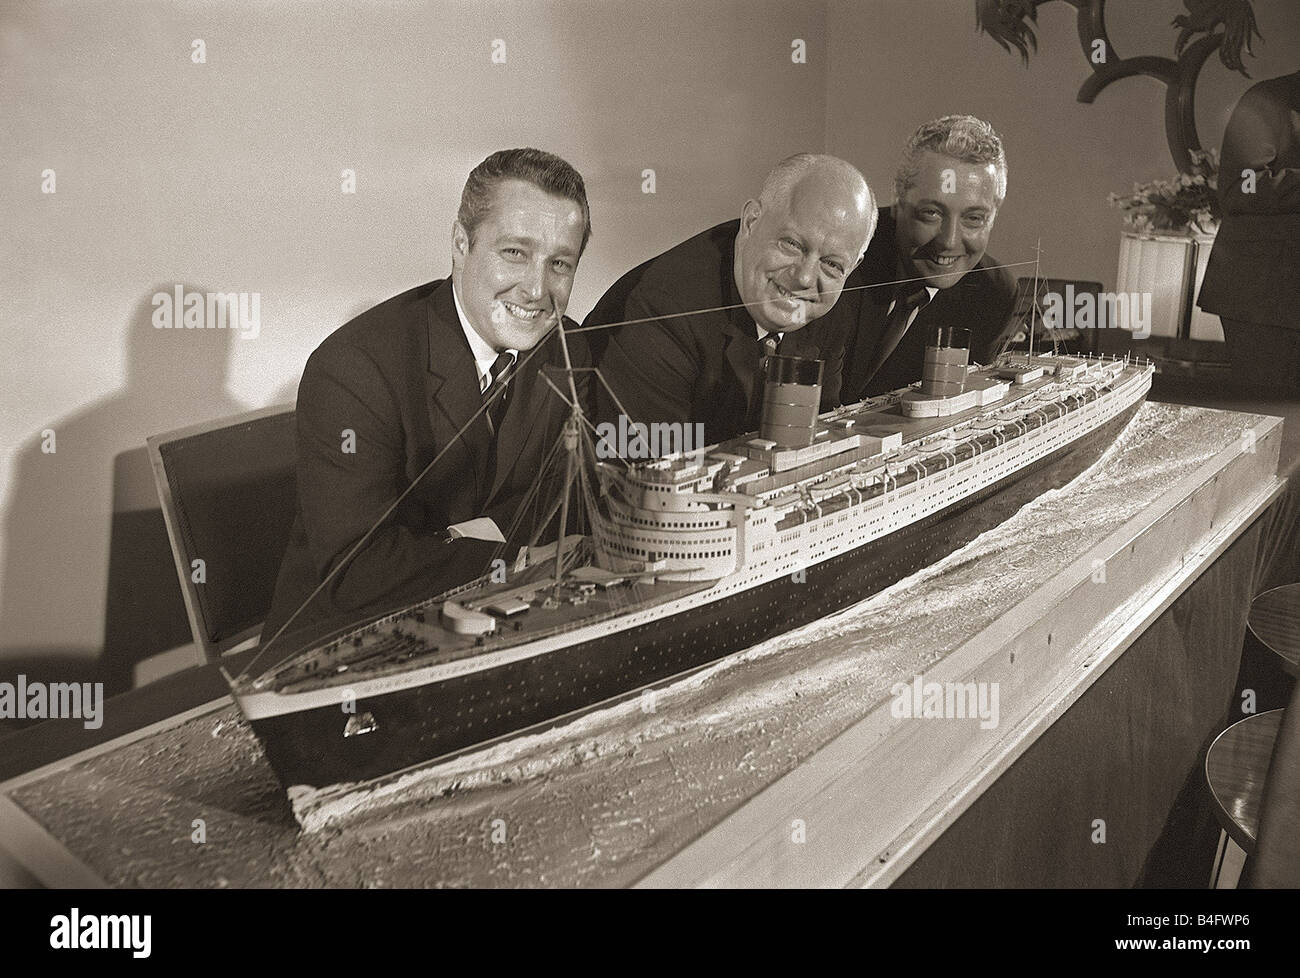 Philadelphia group buy the liner Queen Elizabeth April 1968 Robert B Miller Charles F Williard and Stanton R Miller at the Savoy hotel with a model of the Cunard Line s Queen Elizabeth Liner after buying the Ship for 3 230 000 Philadelphia group buy the Queen Elizabeth Robert B Miller Charles F Williard and Stanton R Miller at the Savoy hotel with a model of the Cunard Line s Queen Elizabeth Liner after buying the Ship for 3 230 000 Stock Photo